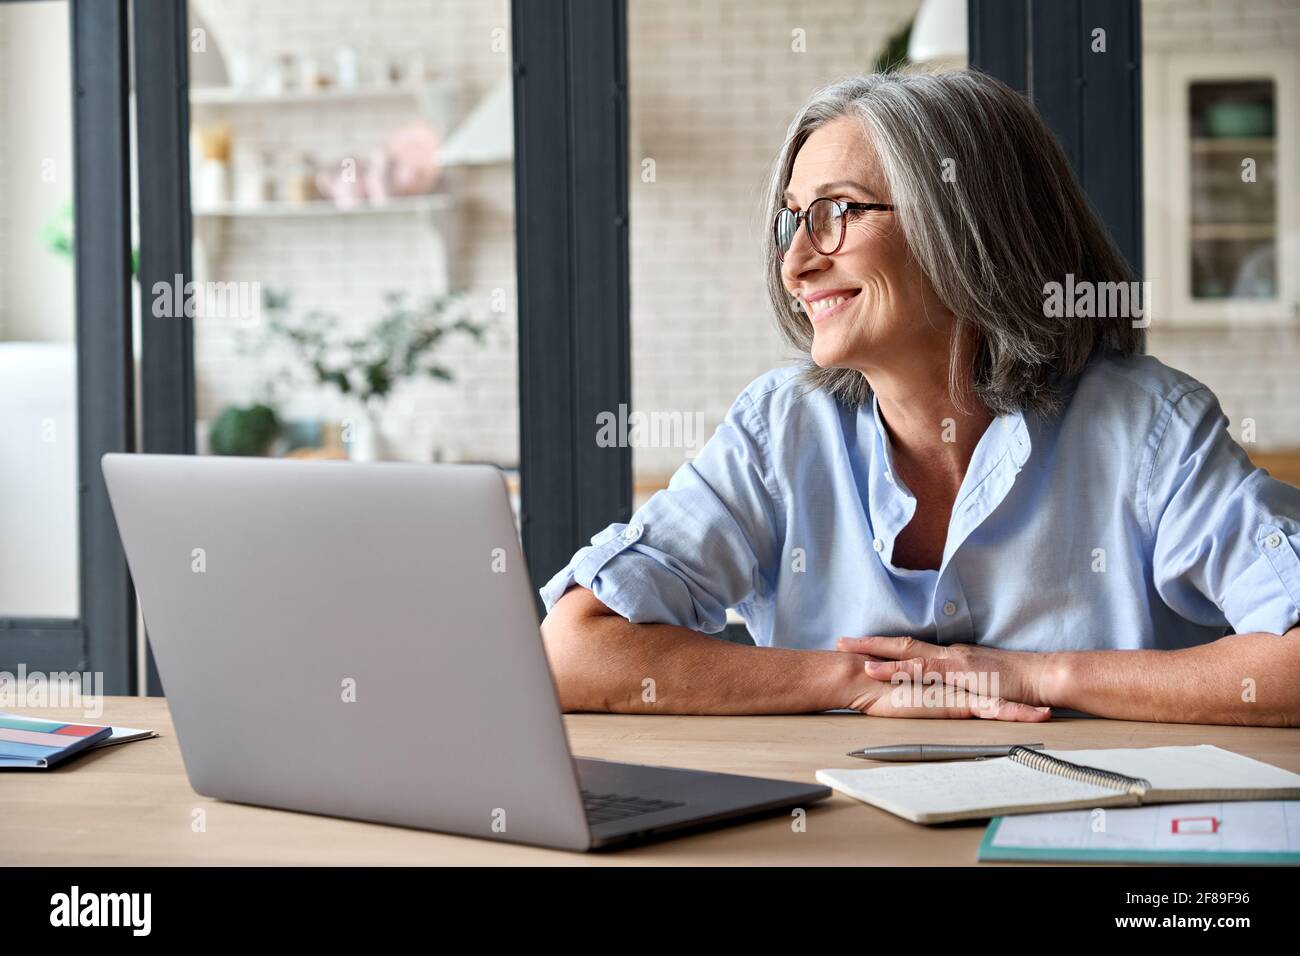 Middle aged woman sitting at home with computer smiling dreamingly. Stock Photo